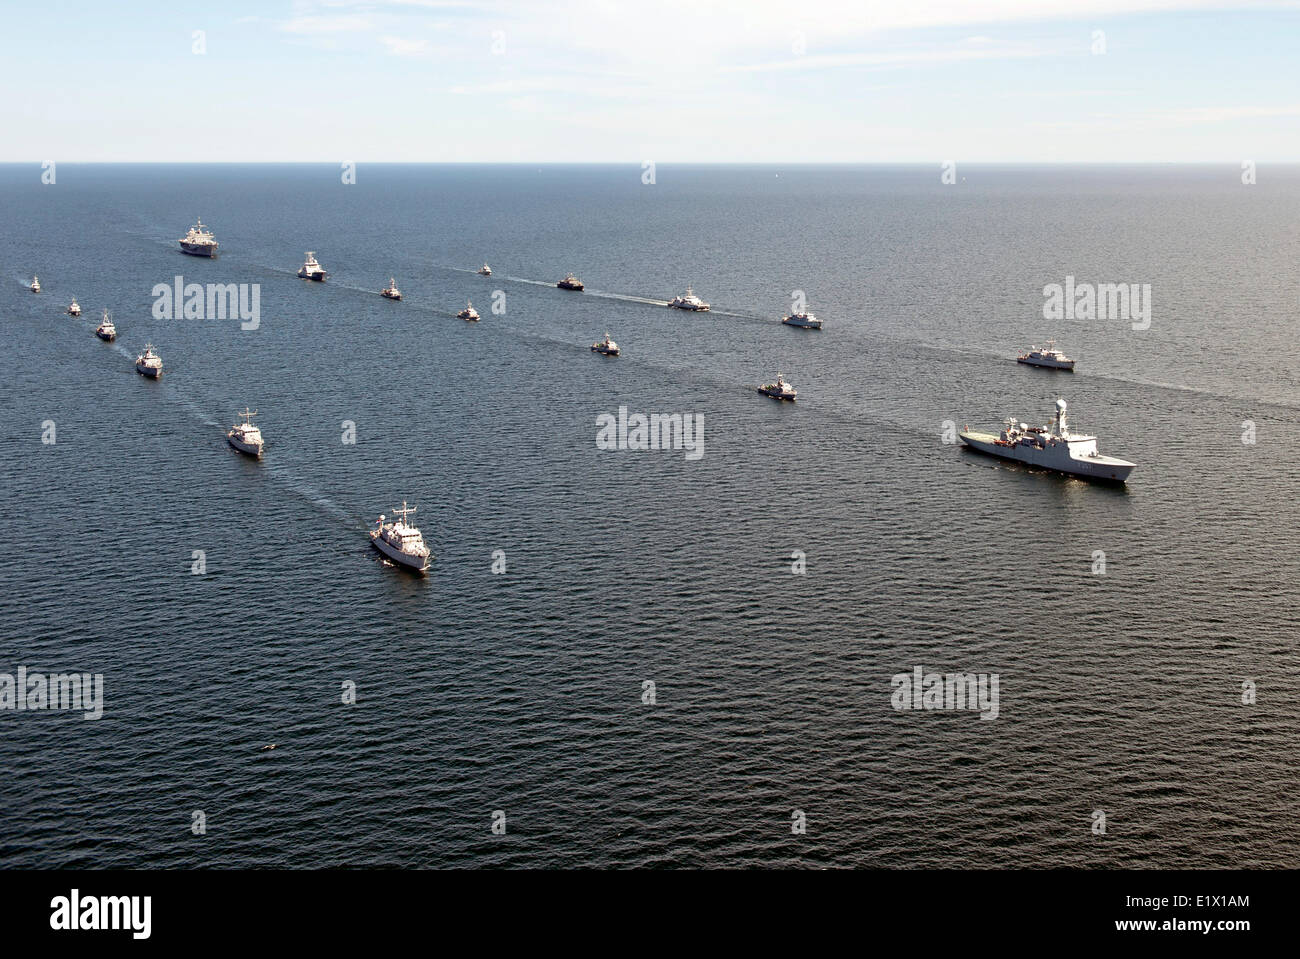 Baltic Sea. 9th June 2014. Navy warships from various nations in the Baltic Region and the US 6th Fleet command ship USS Mount Whitney is underway in formation during exercise Baltic Operations June 9, 2014 in the Baltic Sea. Credit:  Planetpix/Alamy Live News Stock Photo